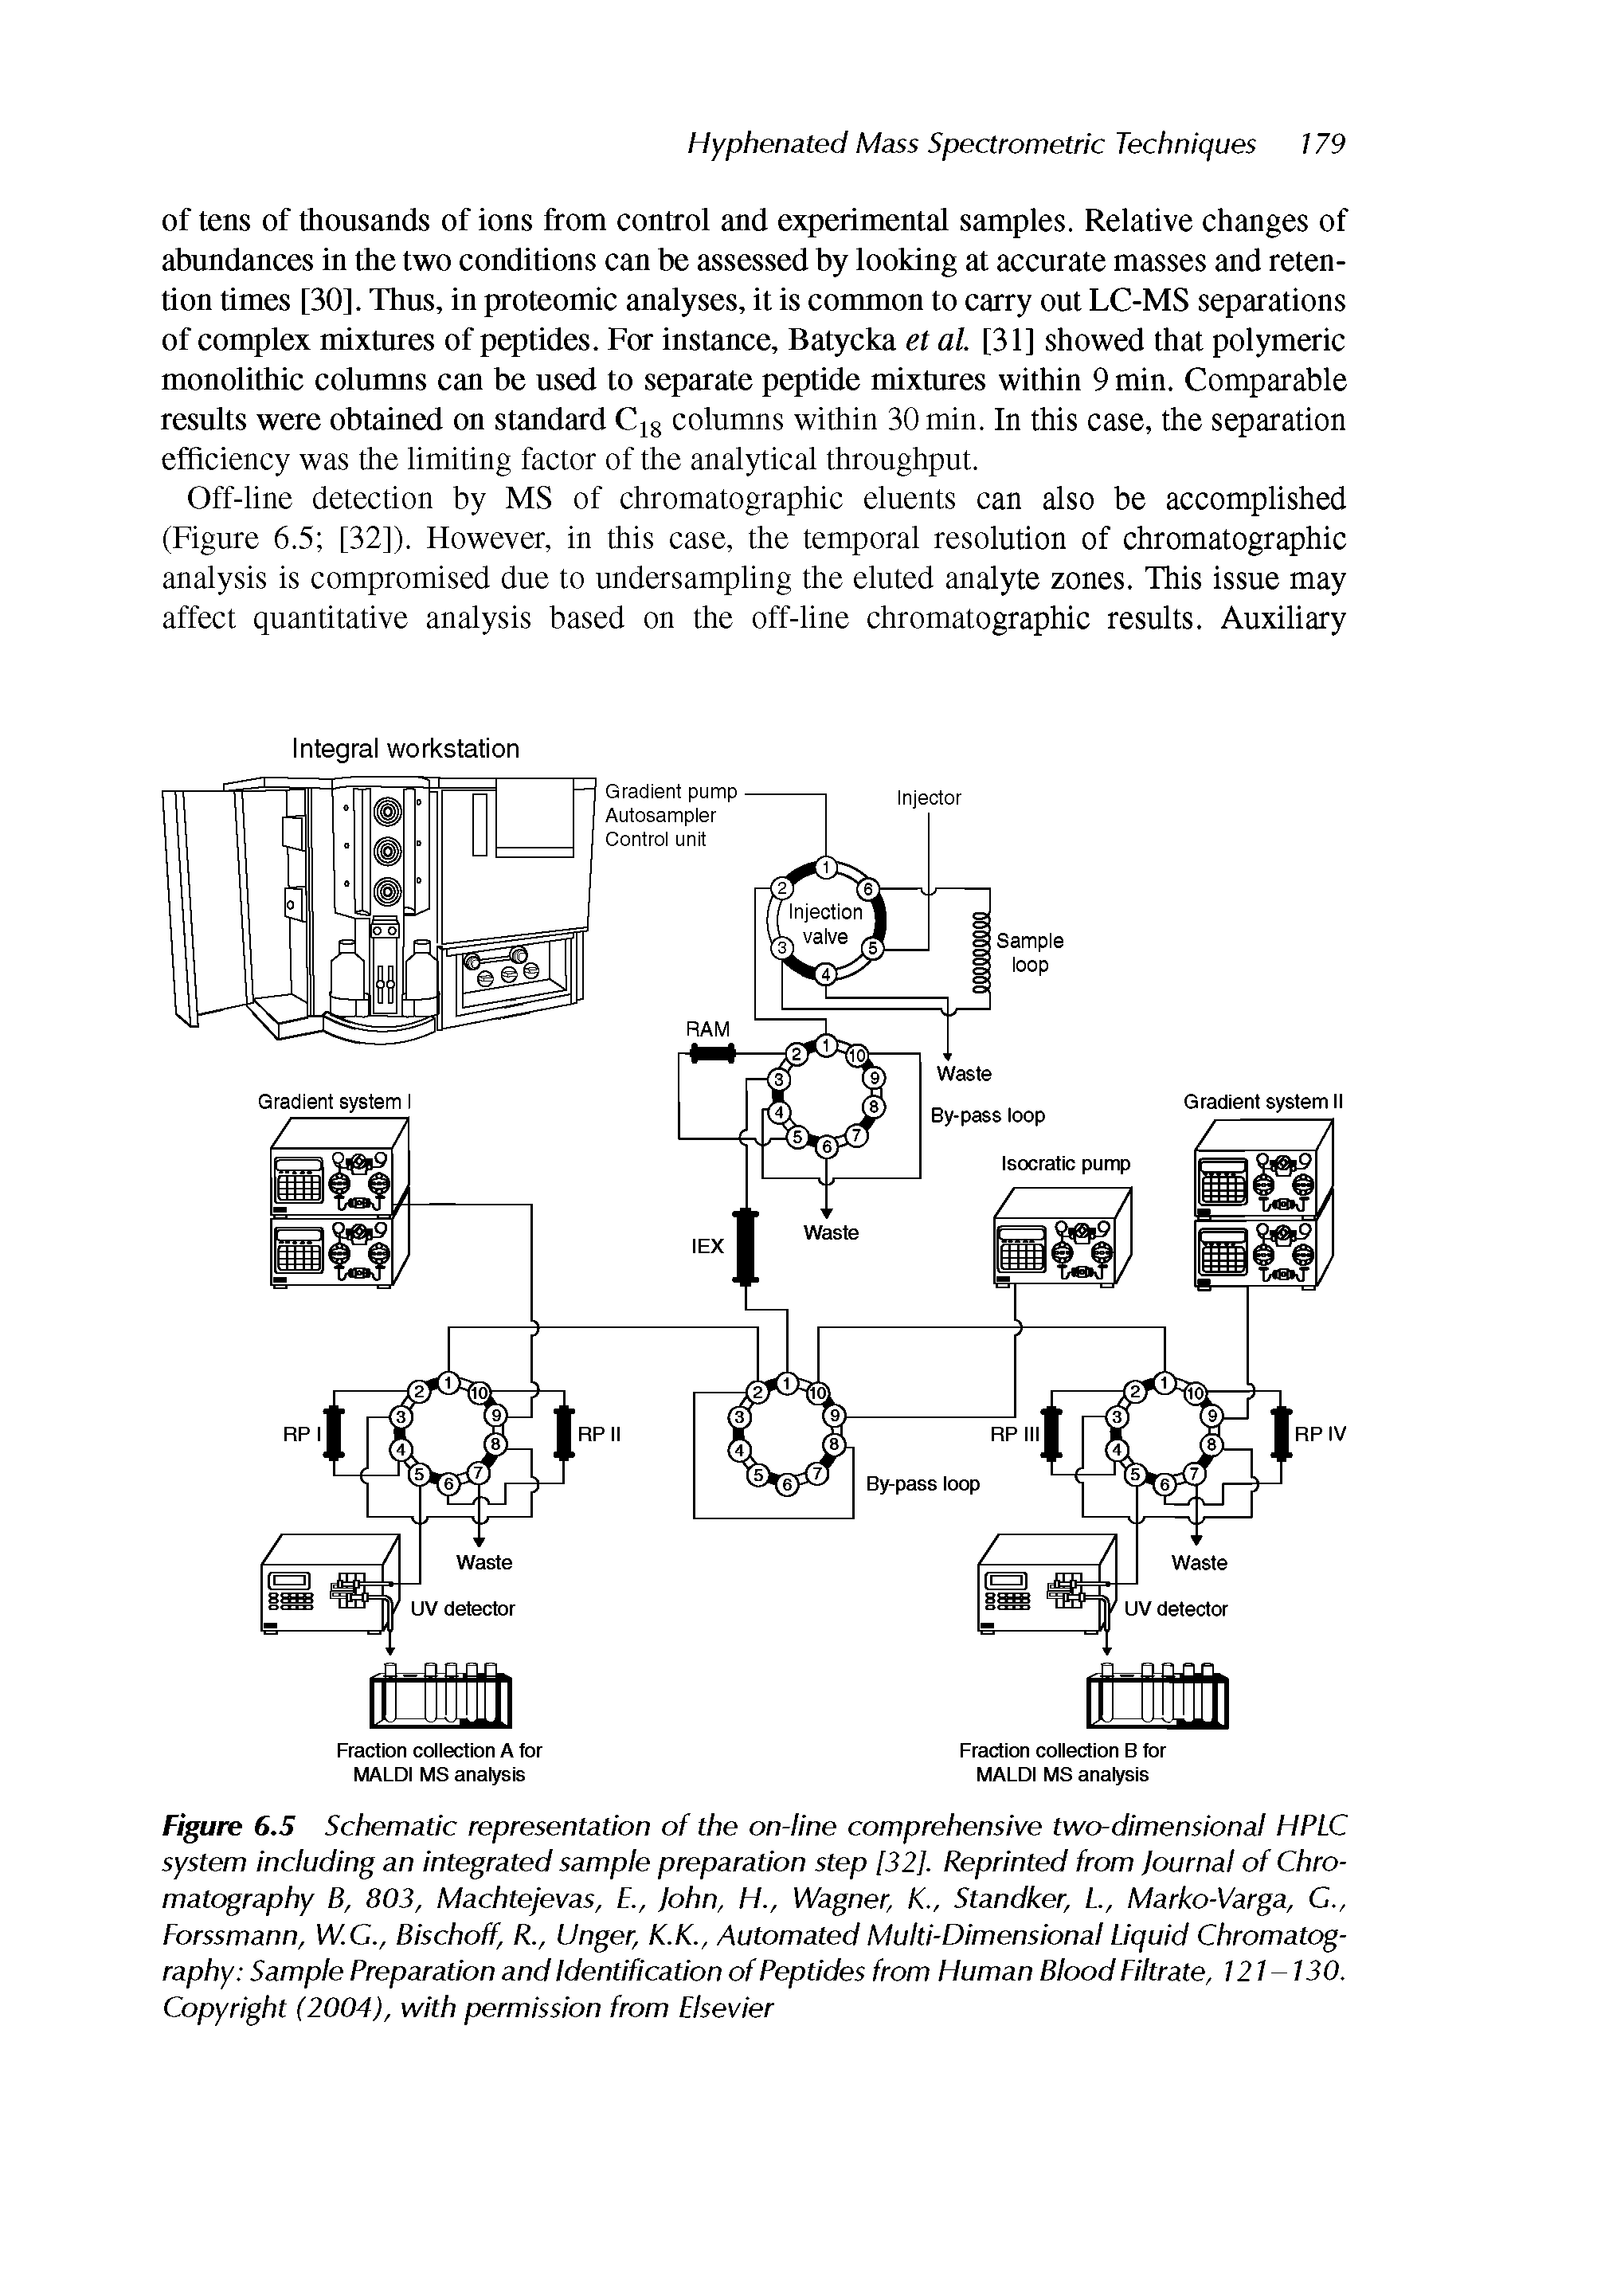 Figure 6.5 Schematic representation of the on-line comprehensive two-dimensional HPLC system including an integrated sample preparation step [32]. Reprinted from Journal of Chromatography B, 803, Machtejevas, E., John, H., Wagner, K., Standker, L, Marko-Varga, C., Forssmann, W.C., Bischoff, R., Unger, K.K., Automated Multi-Dimensional Liquid Chromatography Sample Preparation and Identification of Peptides from Human Blood Filtrate, I2I 130. Copyright (2004), with permission from Elsevier...